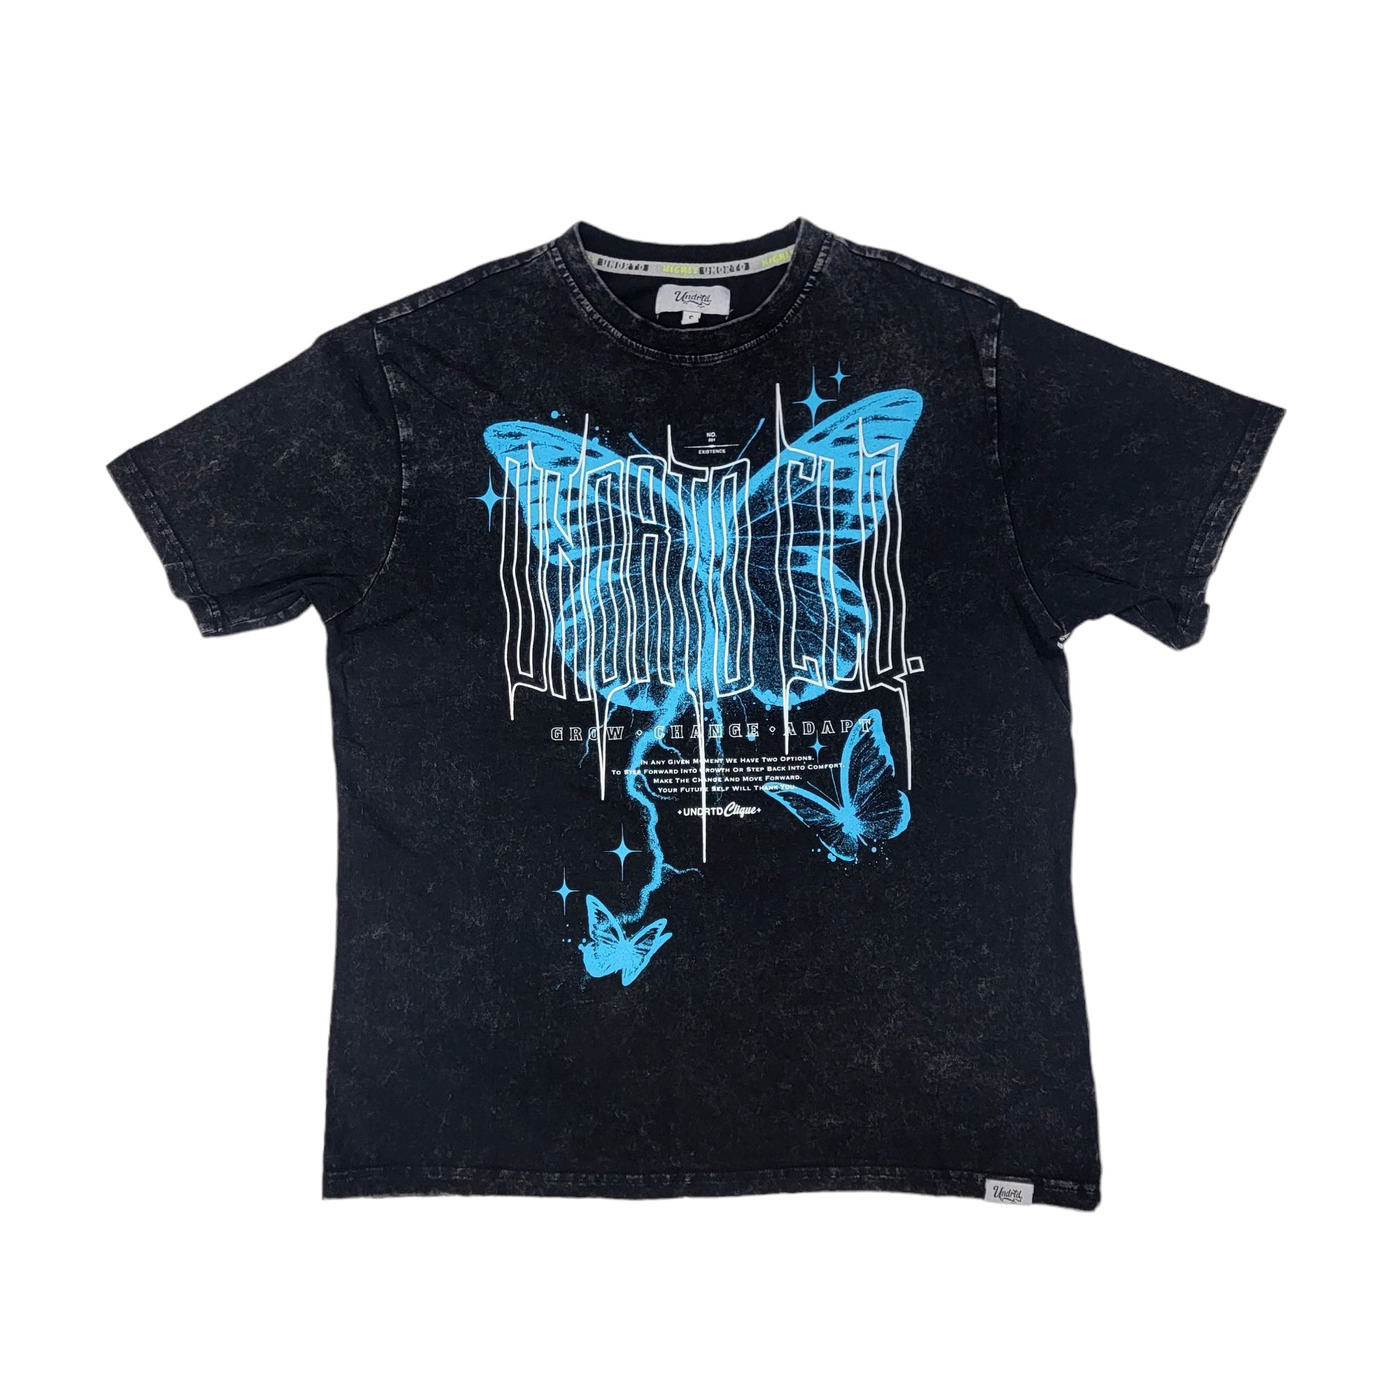 Highly Undrtd Morph Butterfly T-Shirt Vintage Wash US4115W